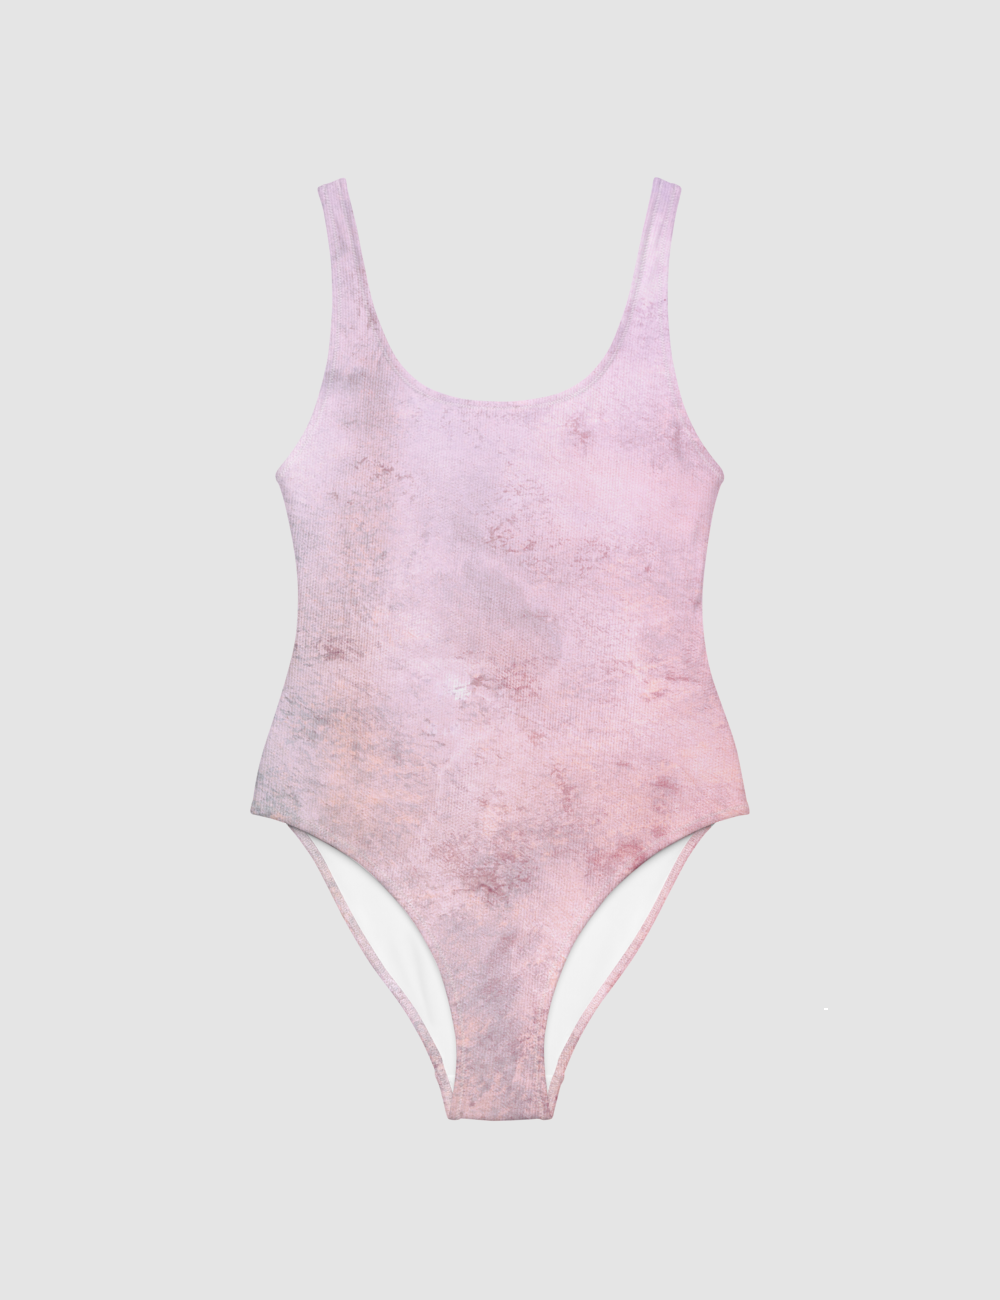 Painted Concrete Abstract | Women's One-Piece Swimsuit OniTakai